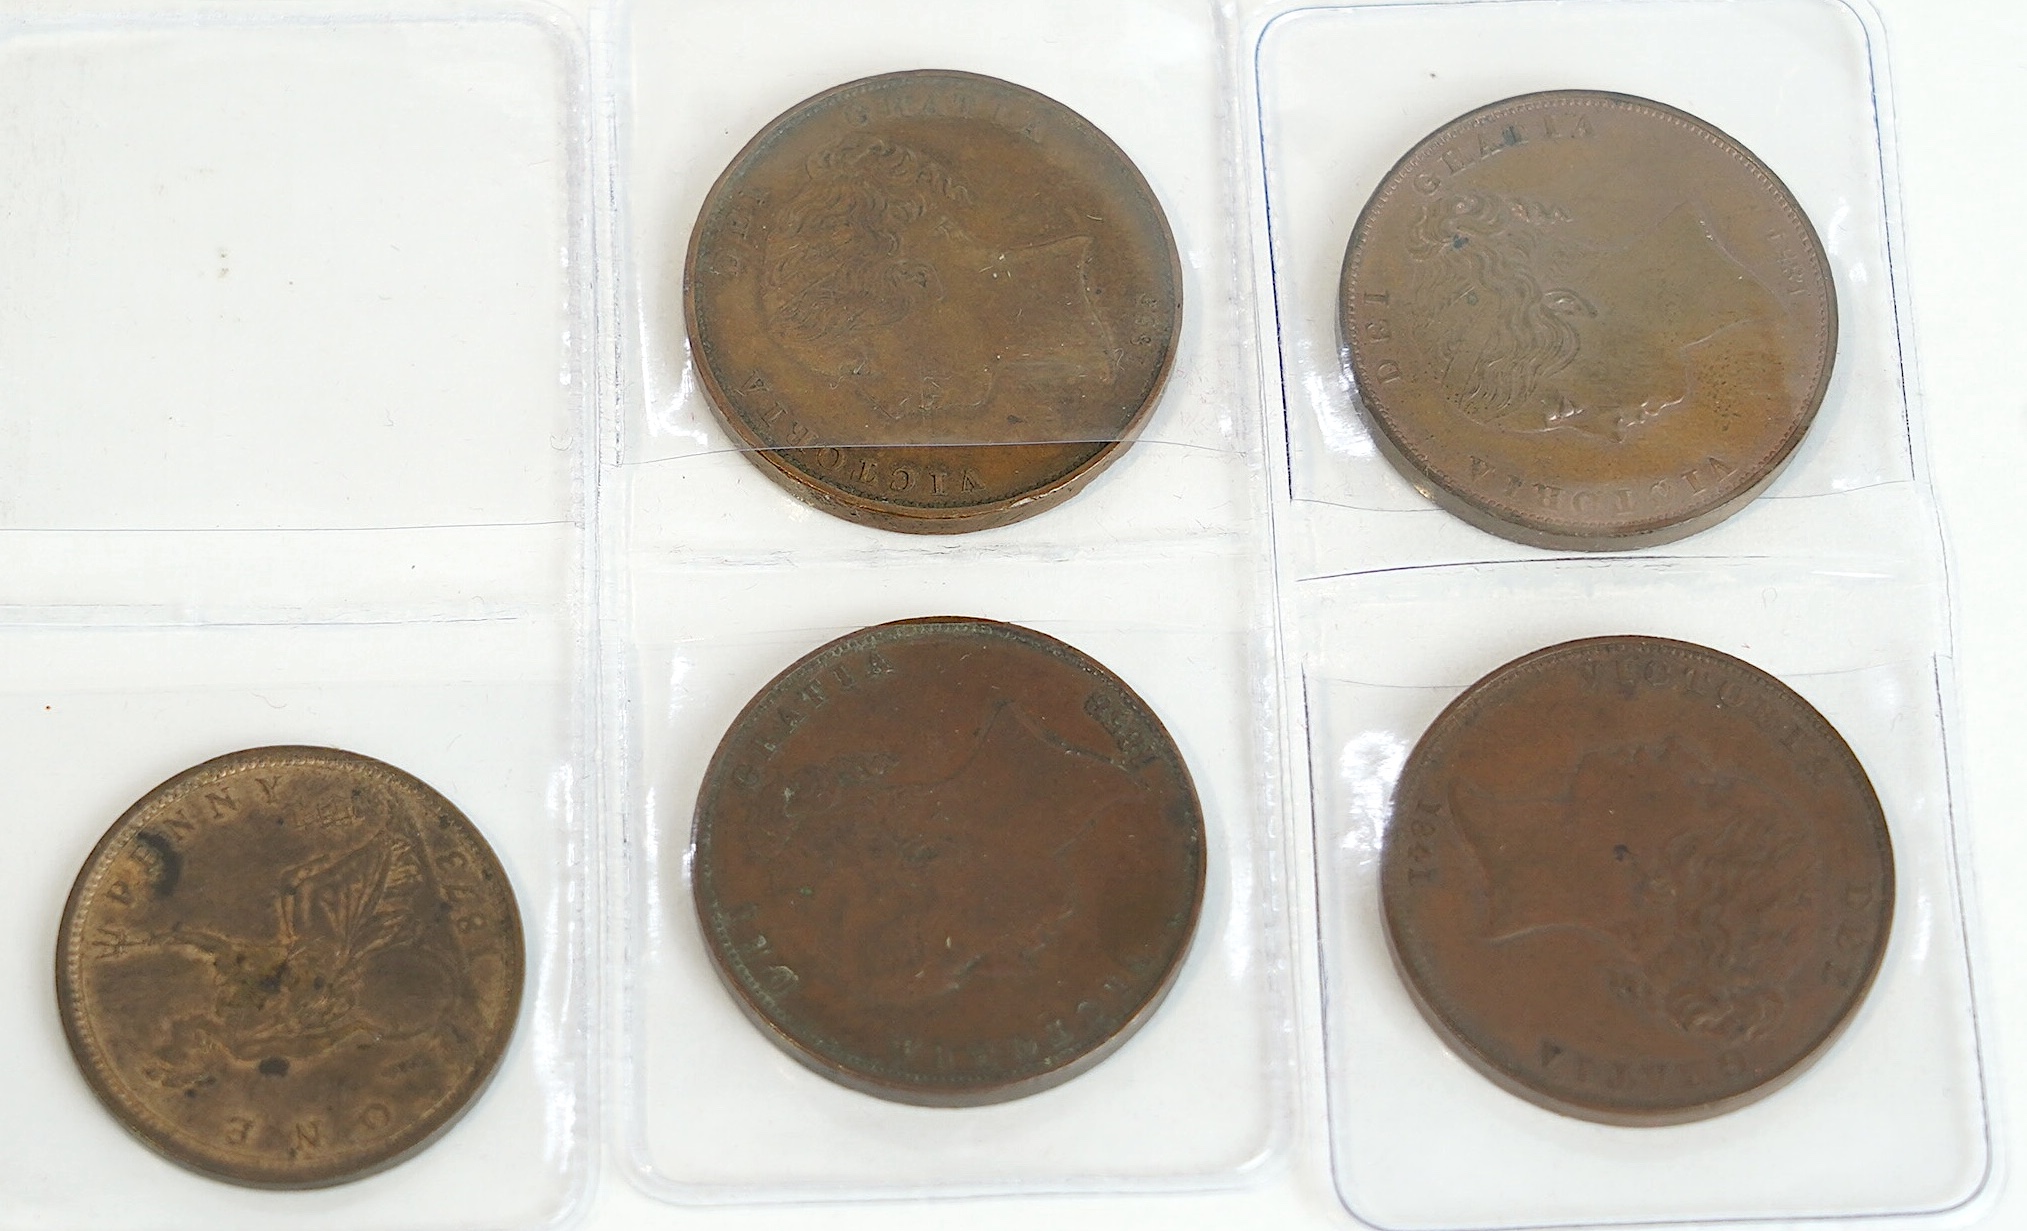 British coins, Victoria (1837-1901), four copper one penny coins, 1841, good VF, 1854, about UNC with some lustre, 1855 and 1858, both VF, together with an 1873 bronze one penny, UNC with some original lustre (5)